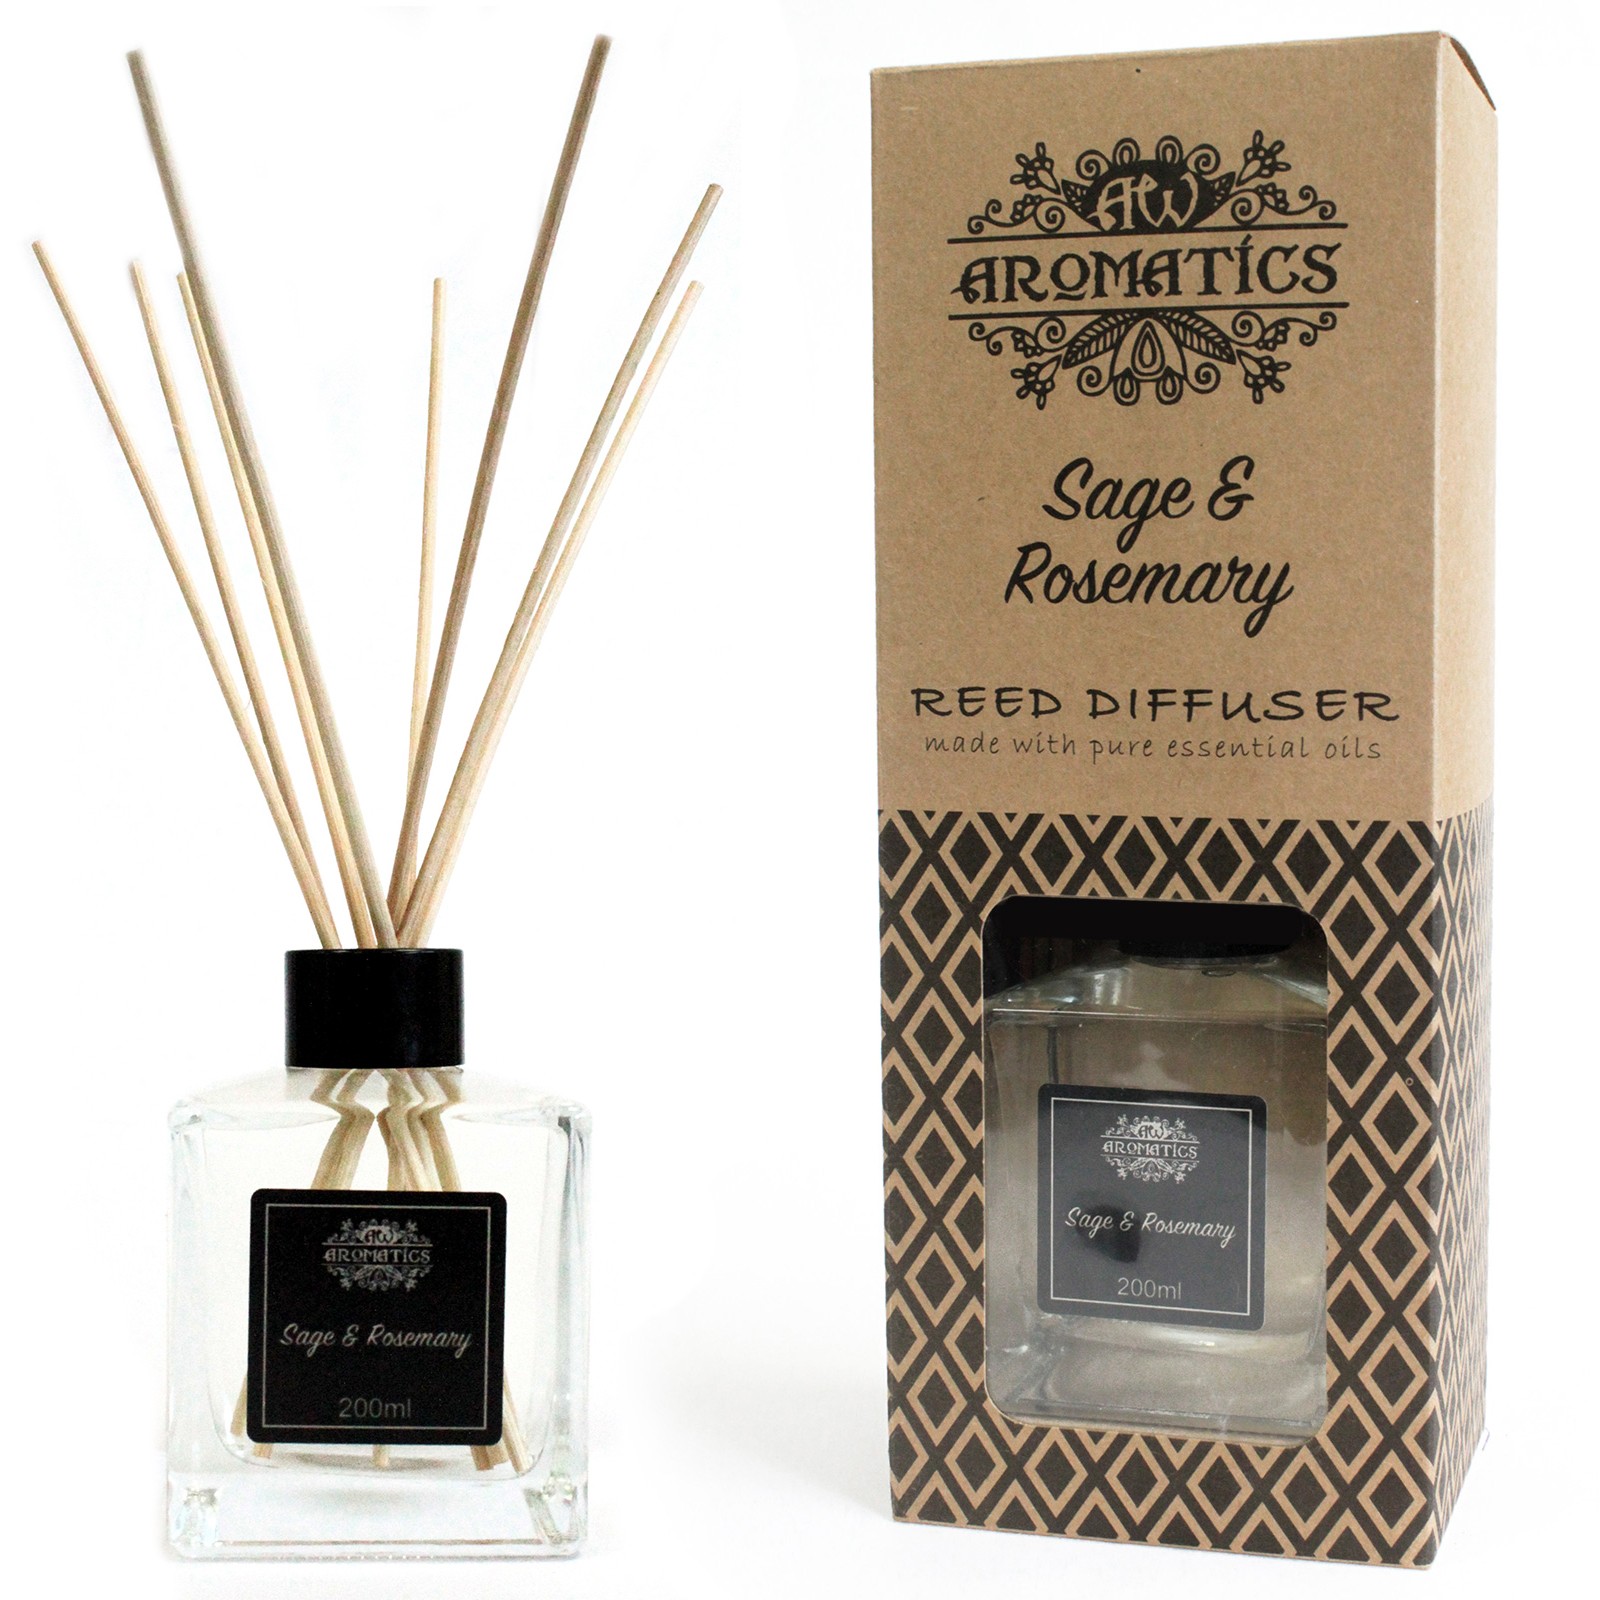 200ml Essential Oil Reed Diffuser - Sage & Rosemary